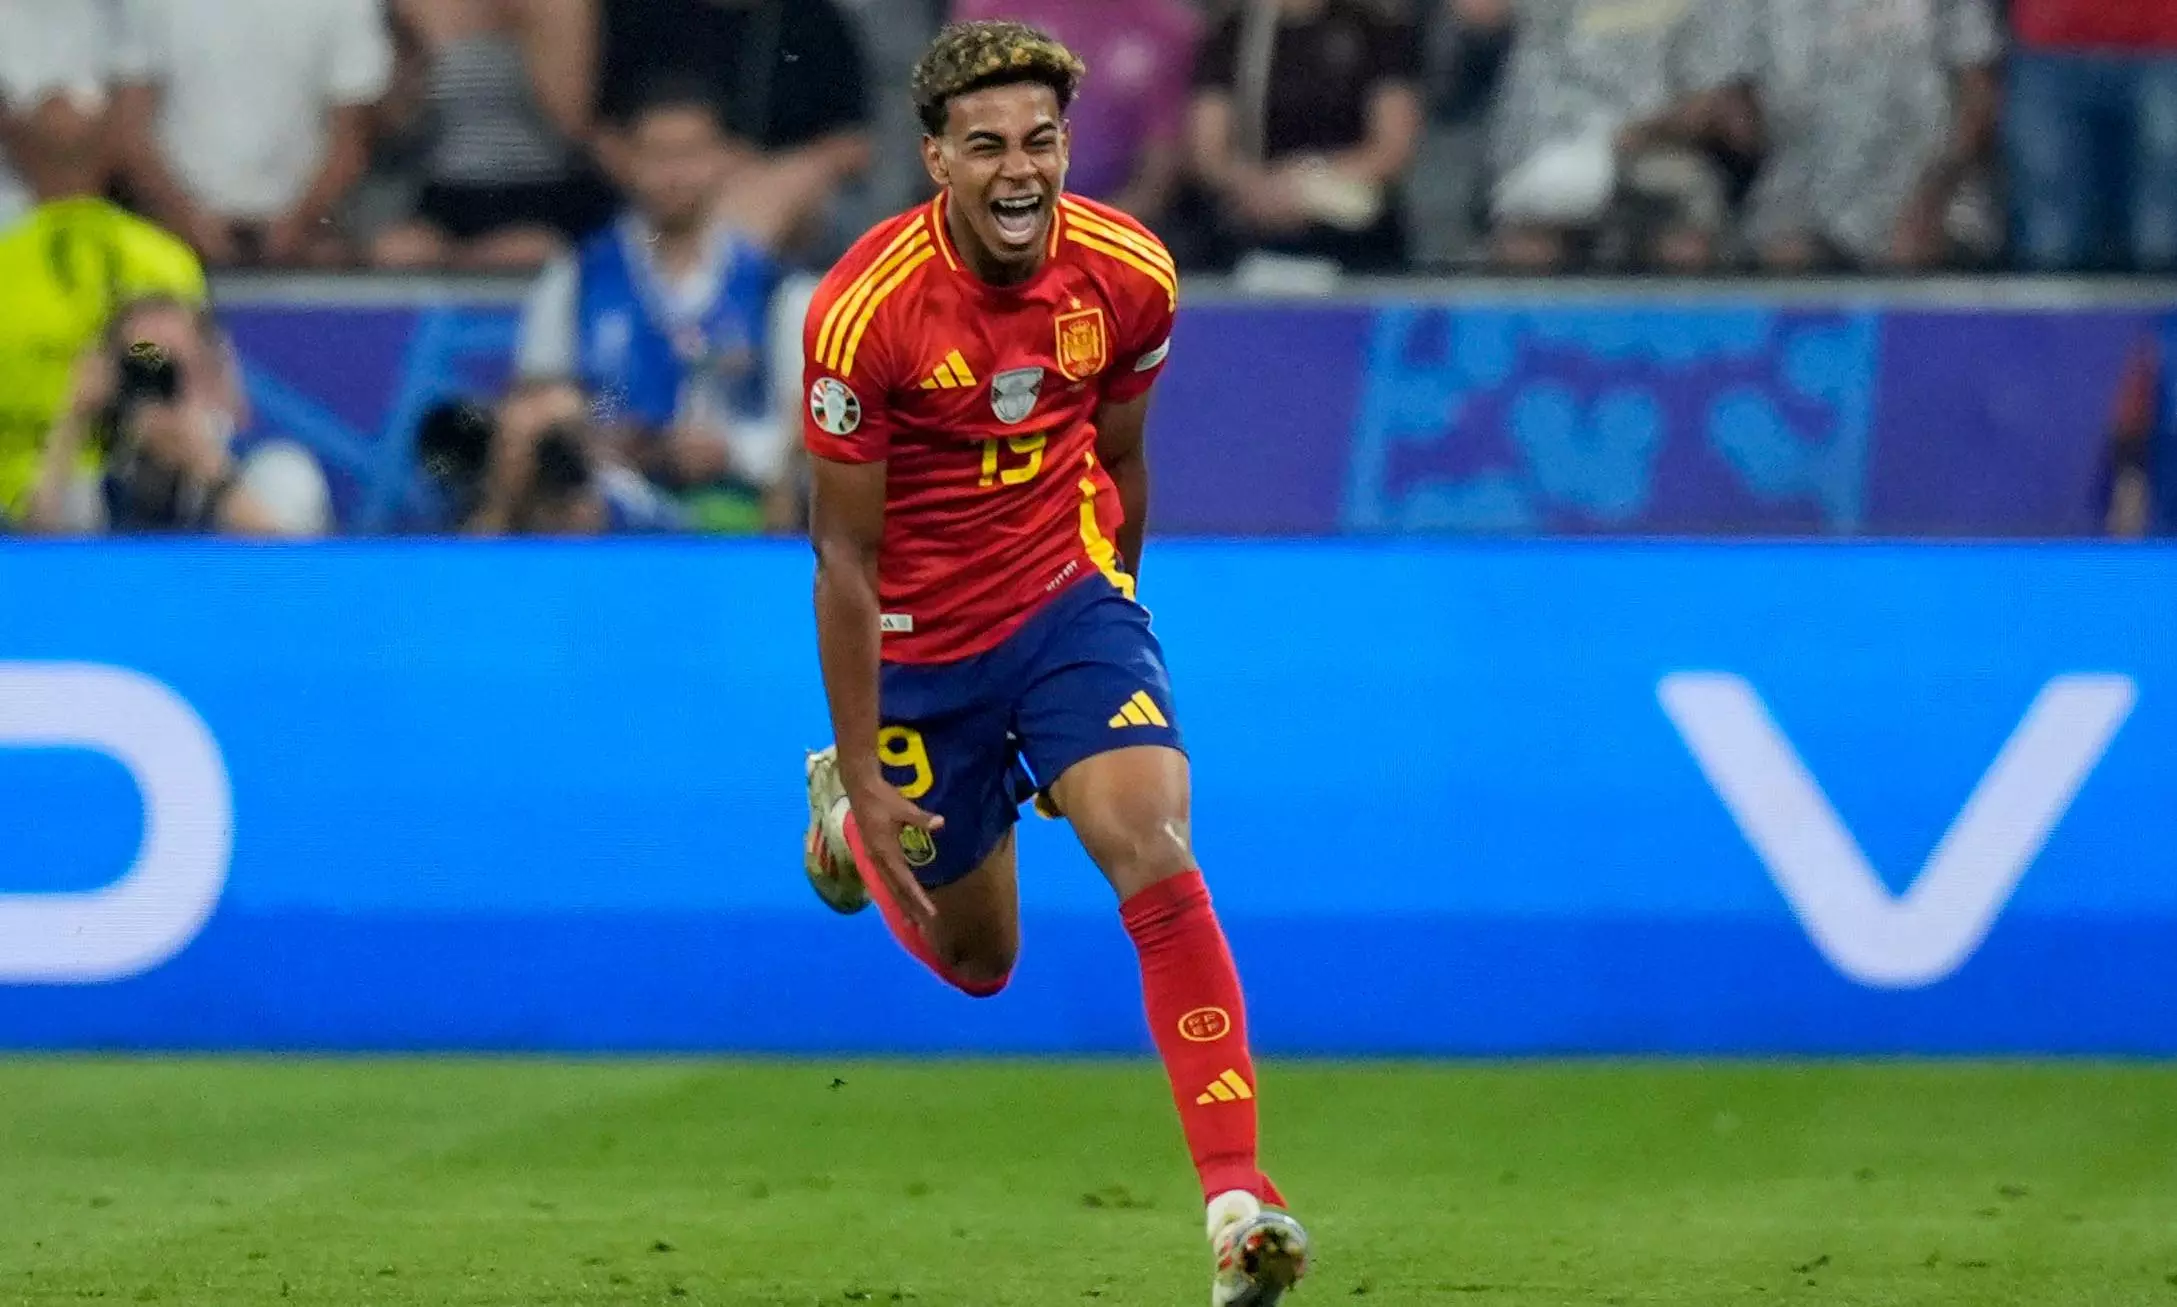 Lamine Yamal don become di youngest goalscorer for European Championship history as Spain beat France 2-1 to reach di final of Euro 2024.